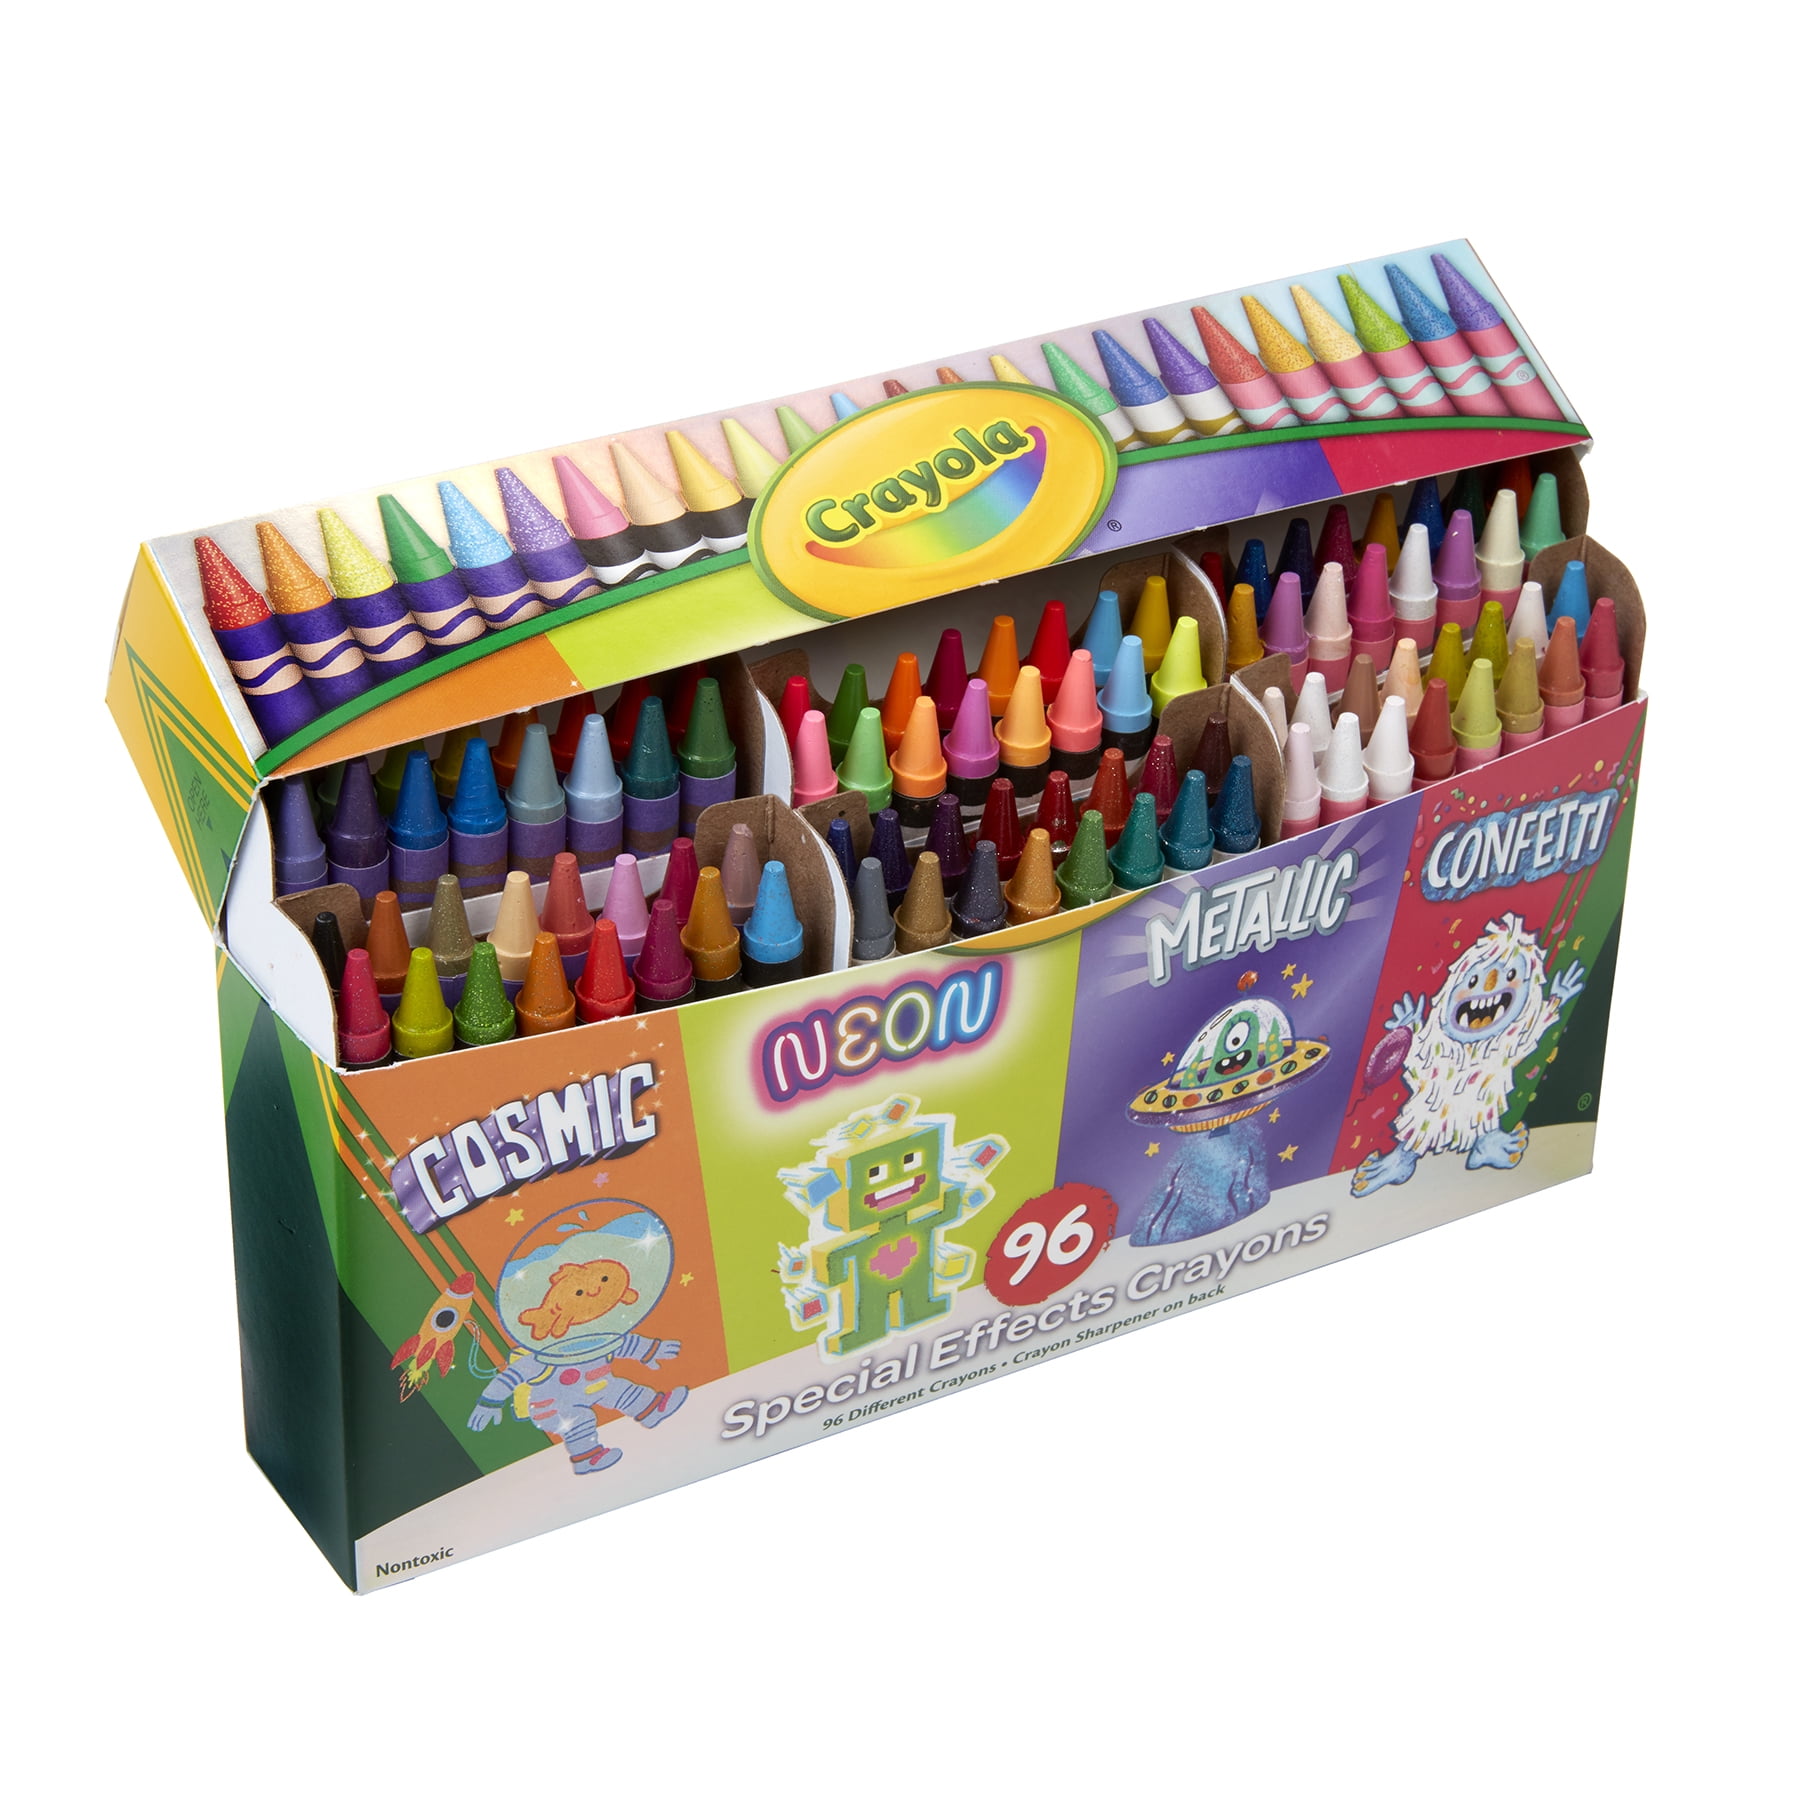 Crayola Special Effects Crayons Assorted 96/Pack (BIN523453), 1 - Smith's  Food and Drug